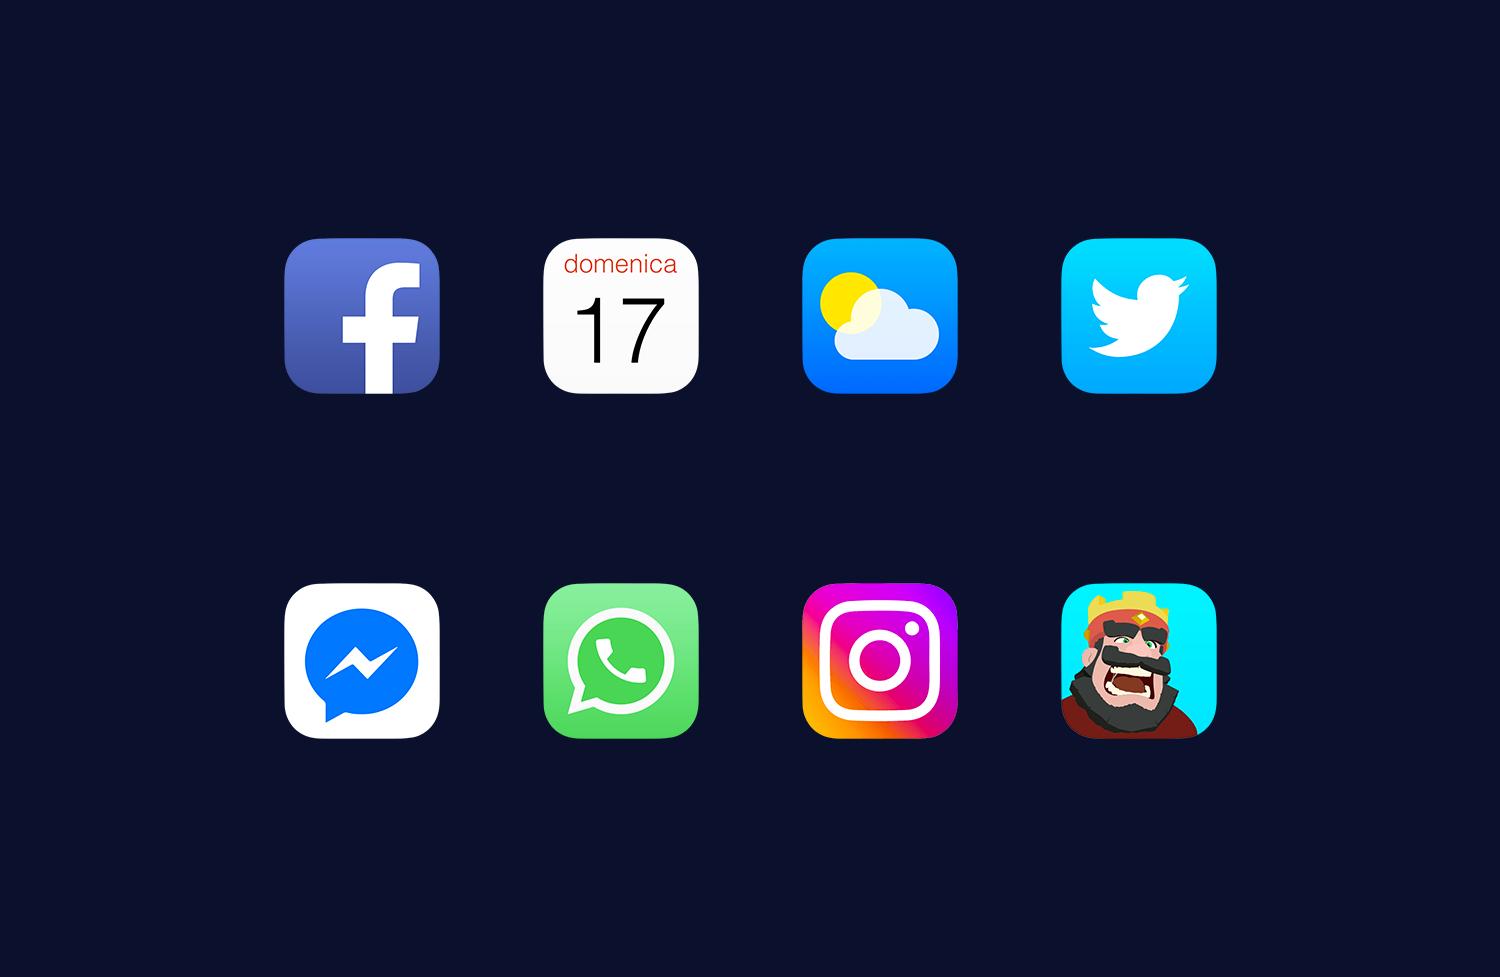 Os icon pack. Android 12 иконки. Android 12 icons. 12 Иконок un. Xiaomi 12 icon Pack.